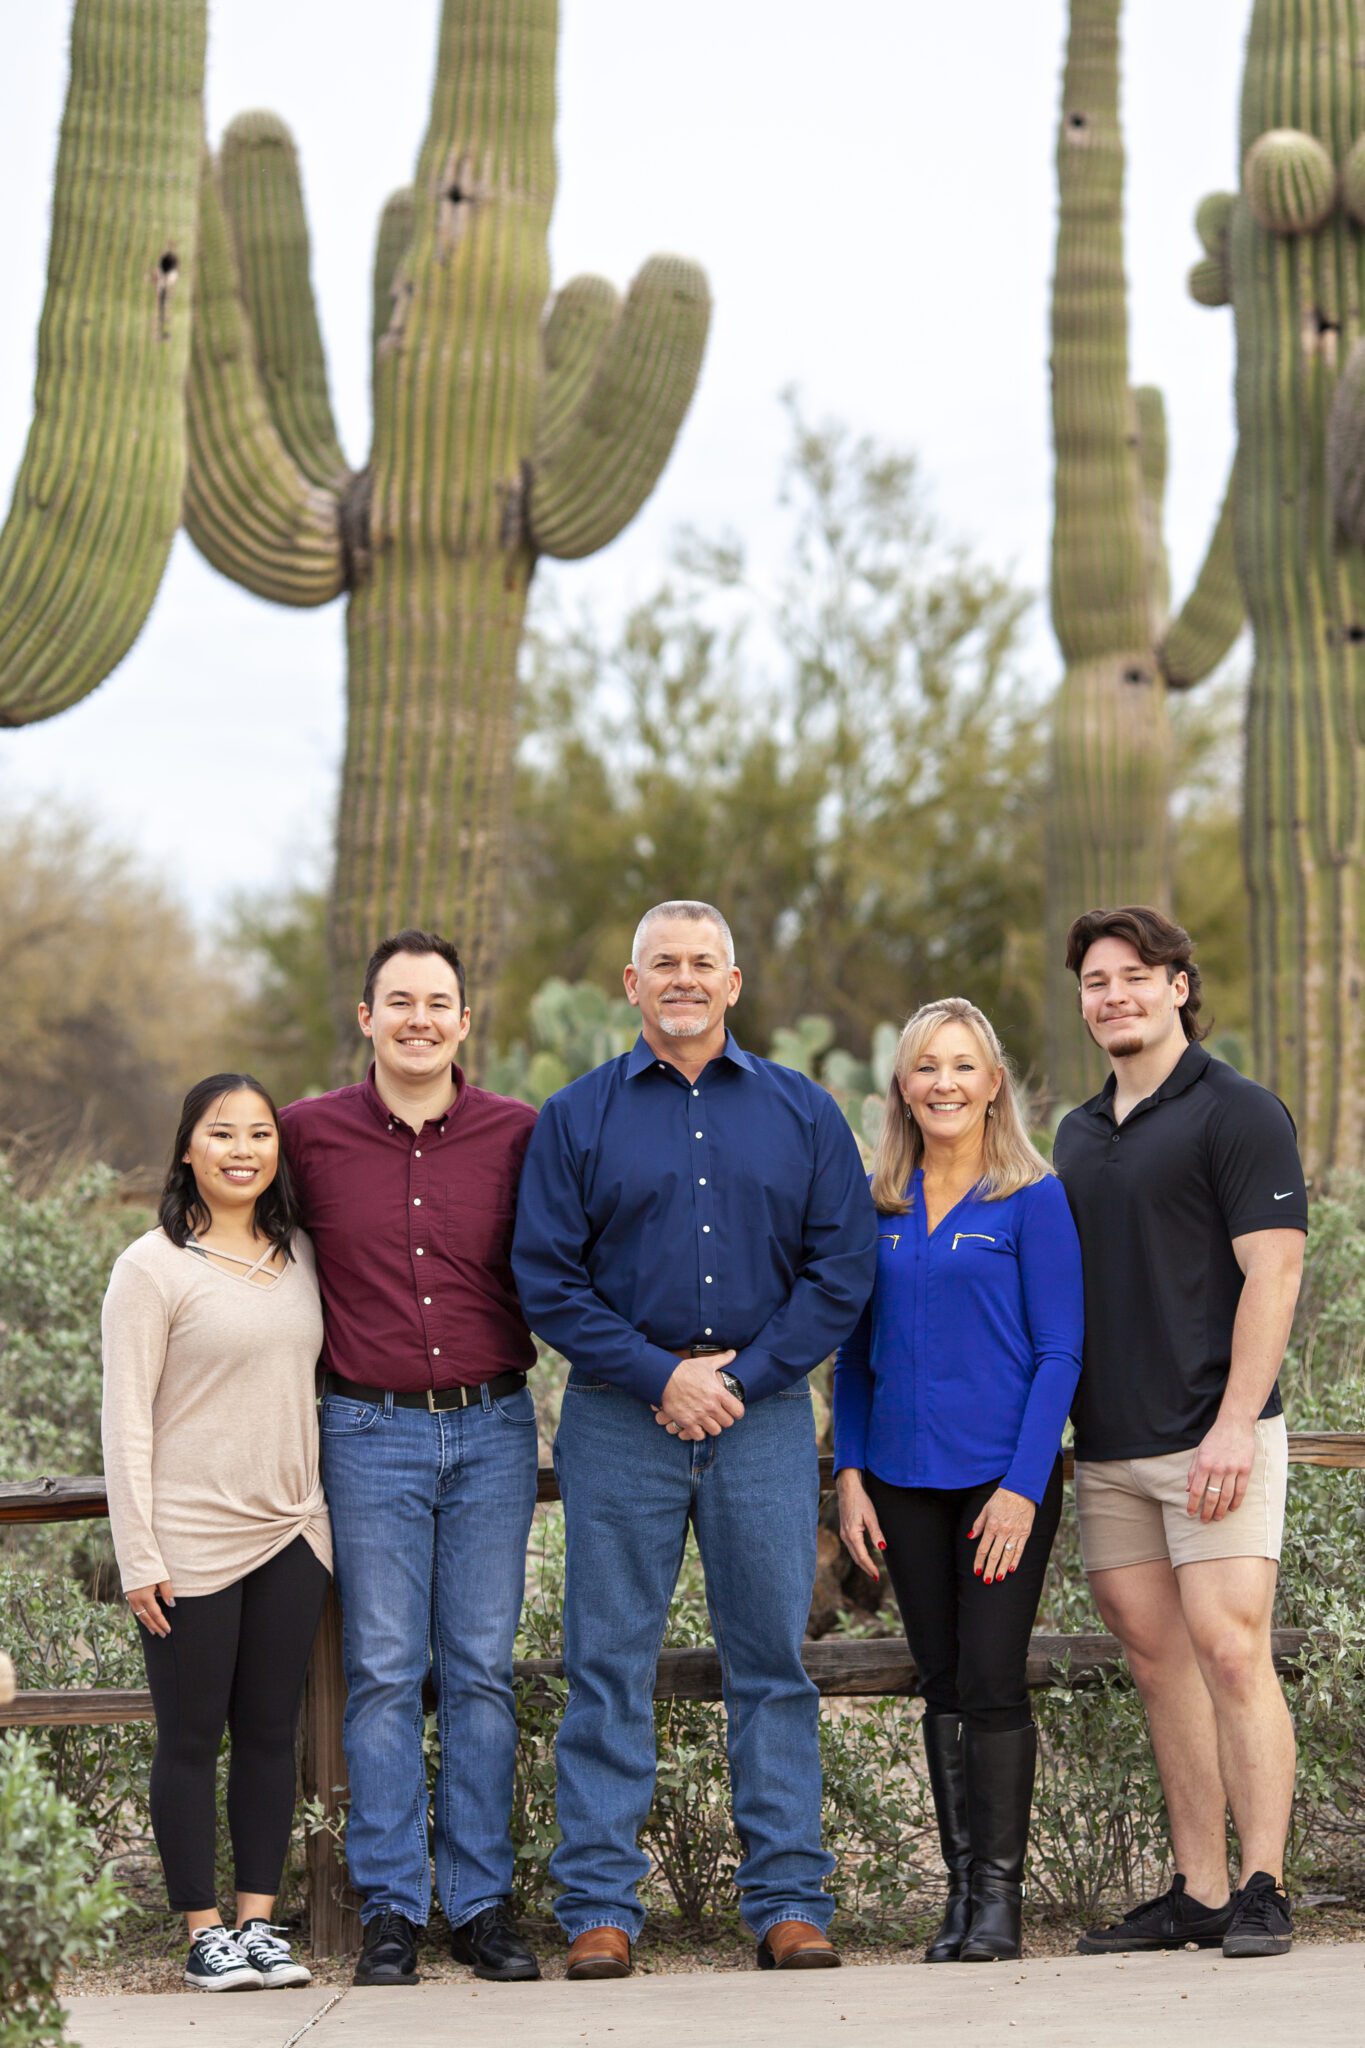 The best extended family photographer in Phoenix